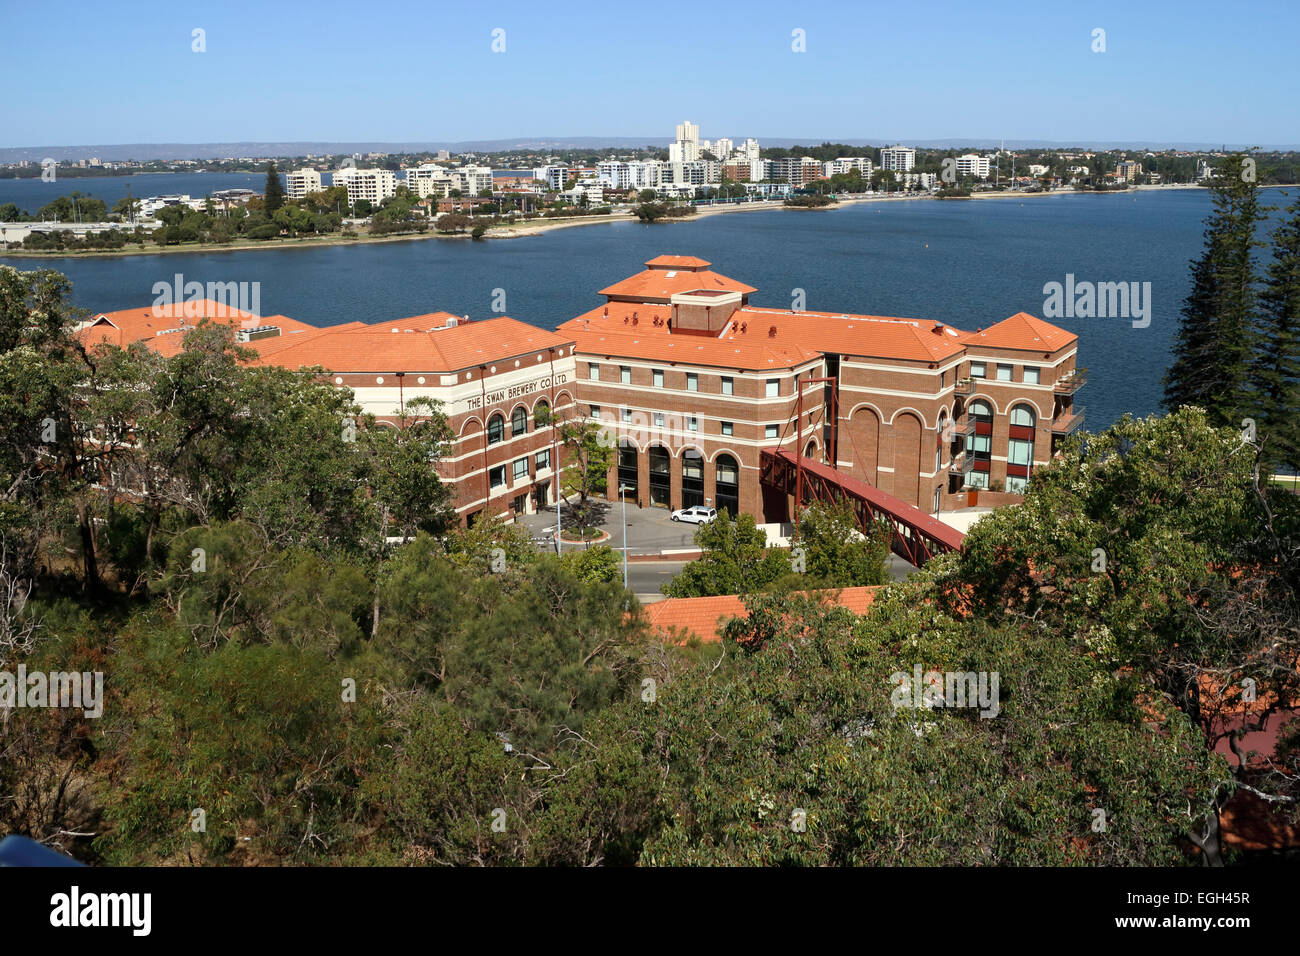 The iconic and historic Swan Brewery building on the banks of the Swan River at the base of Kings Park, Perth, Western Australia Stock Photo